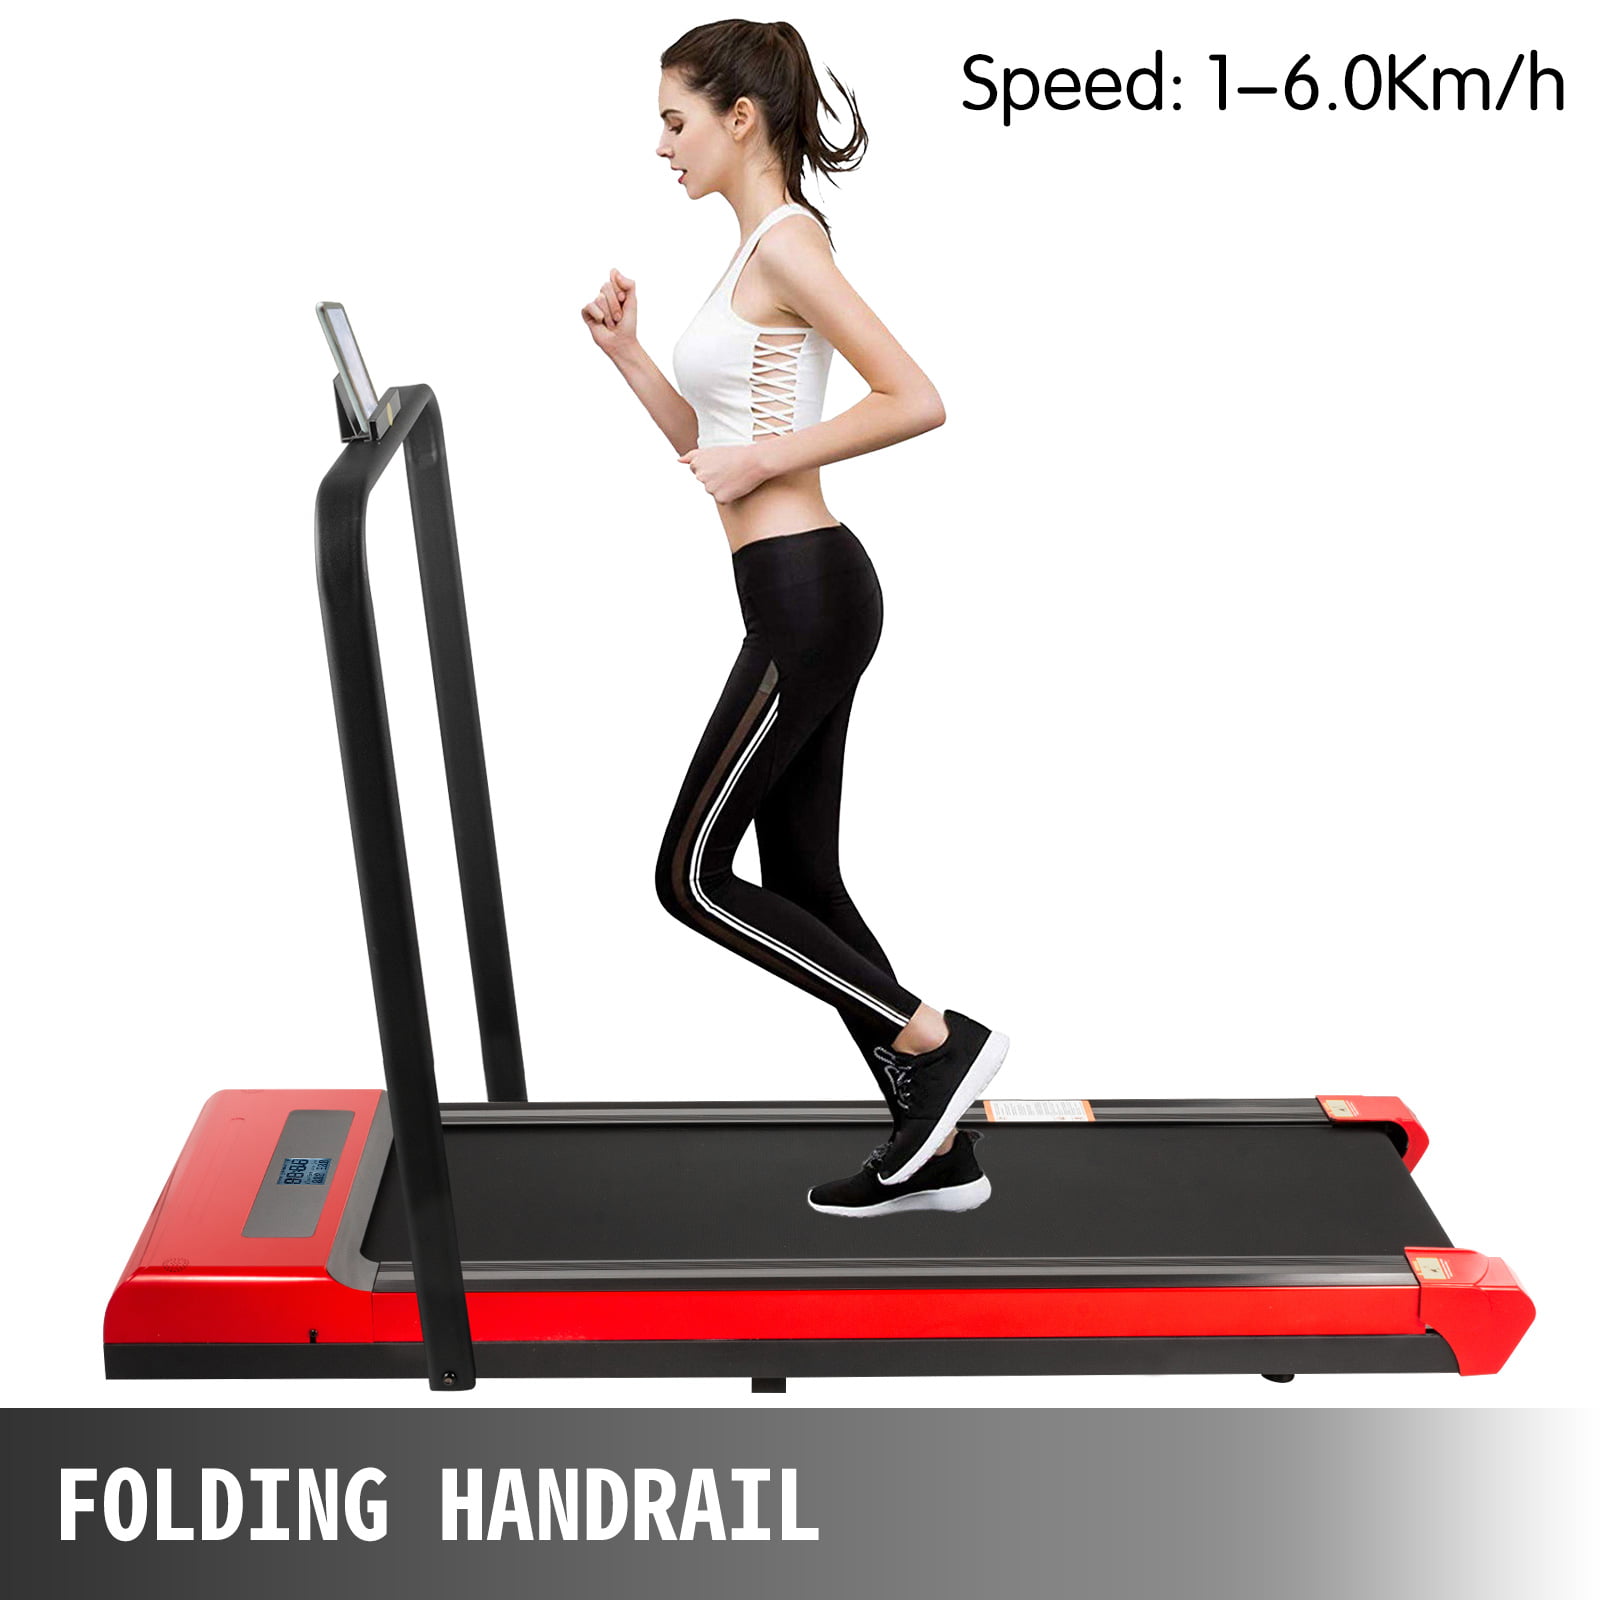 Silver for Home Indoor Exercise VEVOR Under Desk Treadmills Led Digital Display Treadmill Machine with Remote Control,1-6.0km/h Speed Portable Walking Machine with Handrail for Walk 